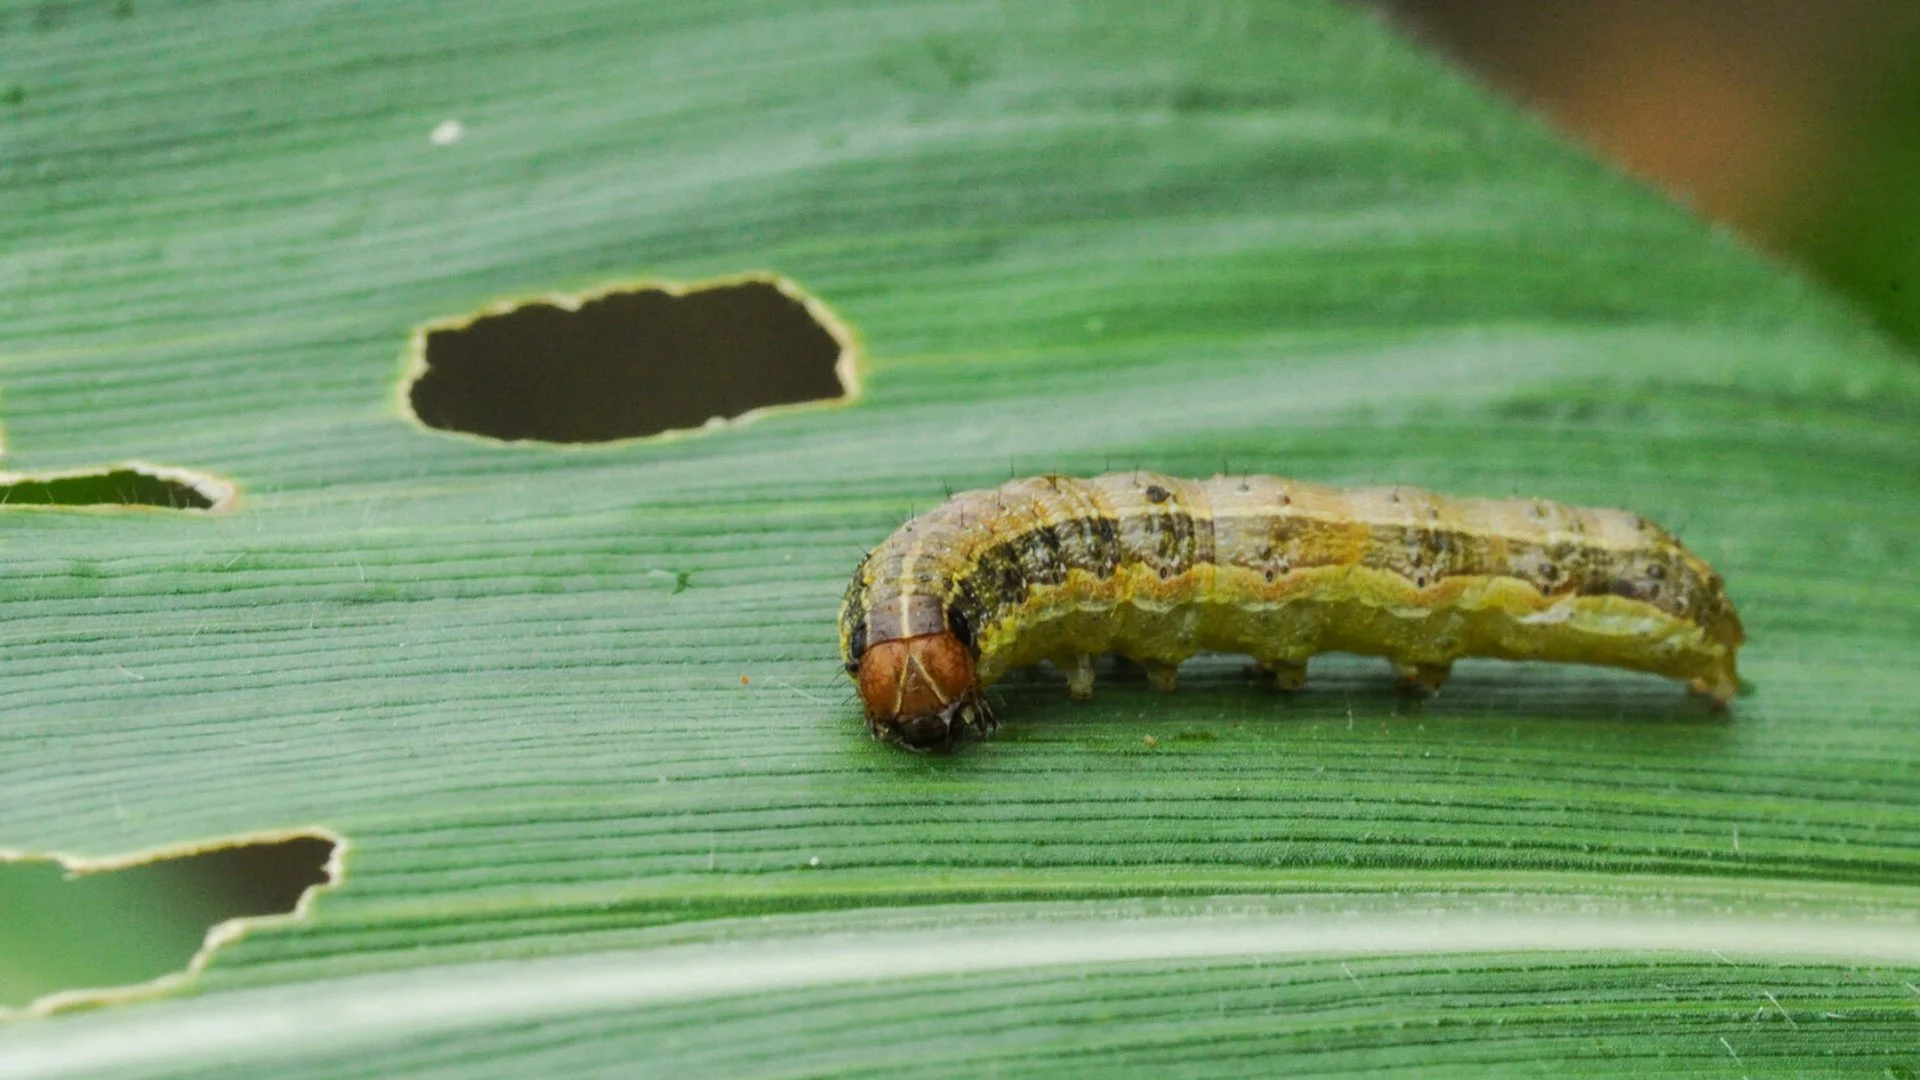 Armyworms or Grubs - Which of These Insects Is Destroying Your Lawn?